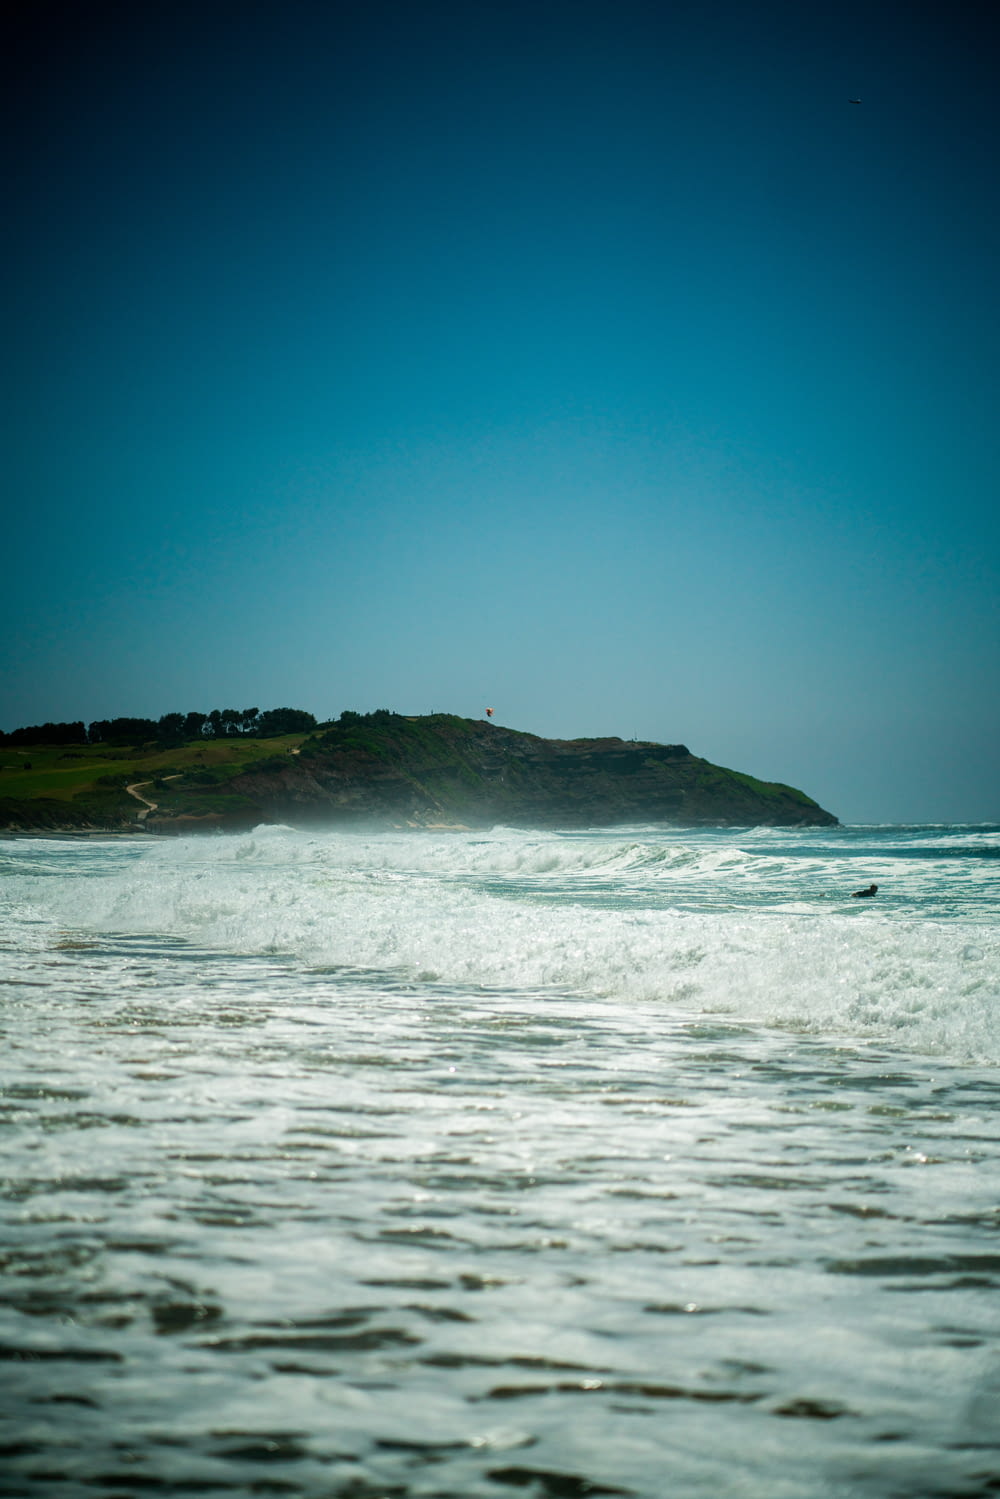 a body of water with waves and a hill in the background